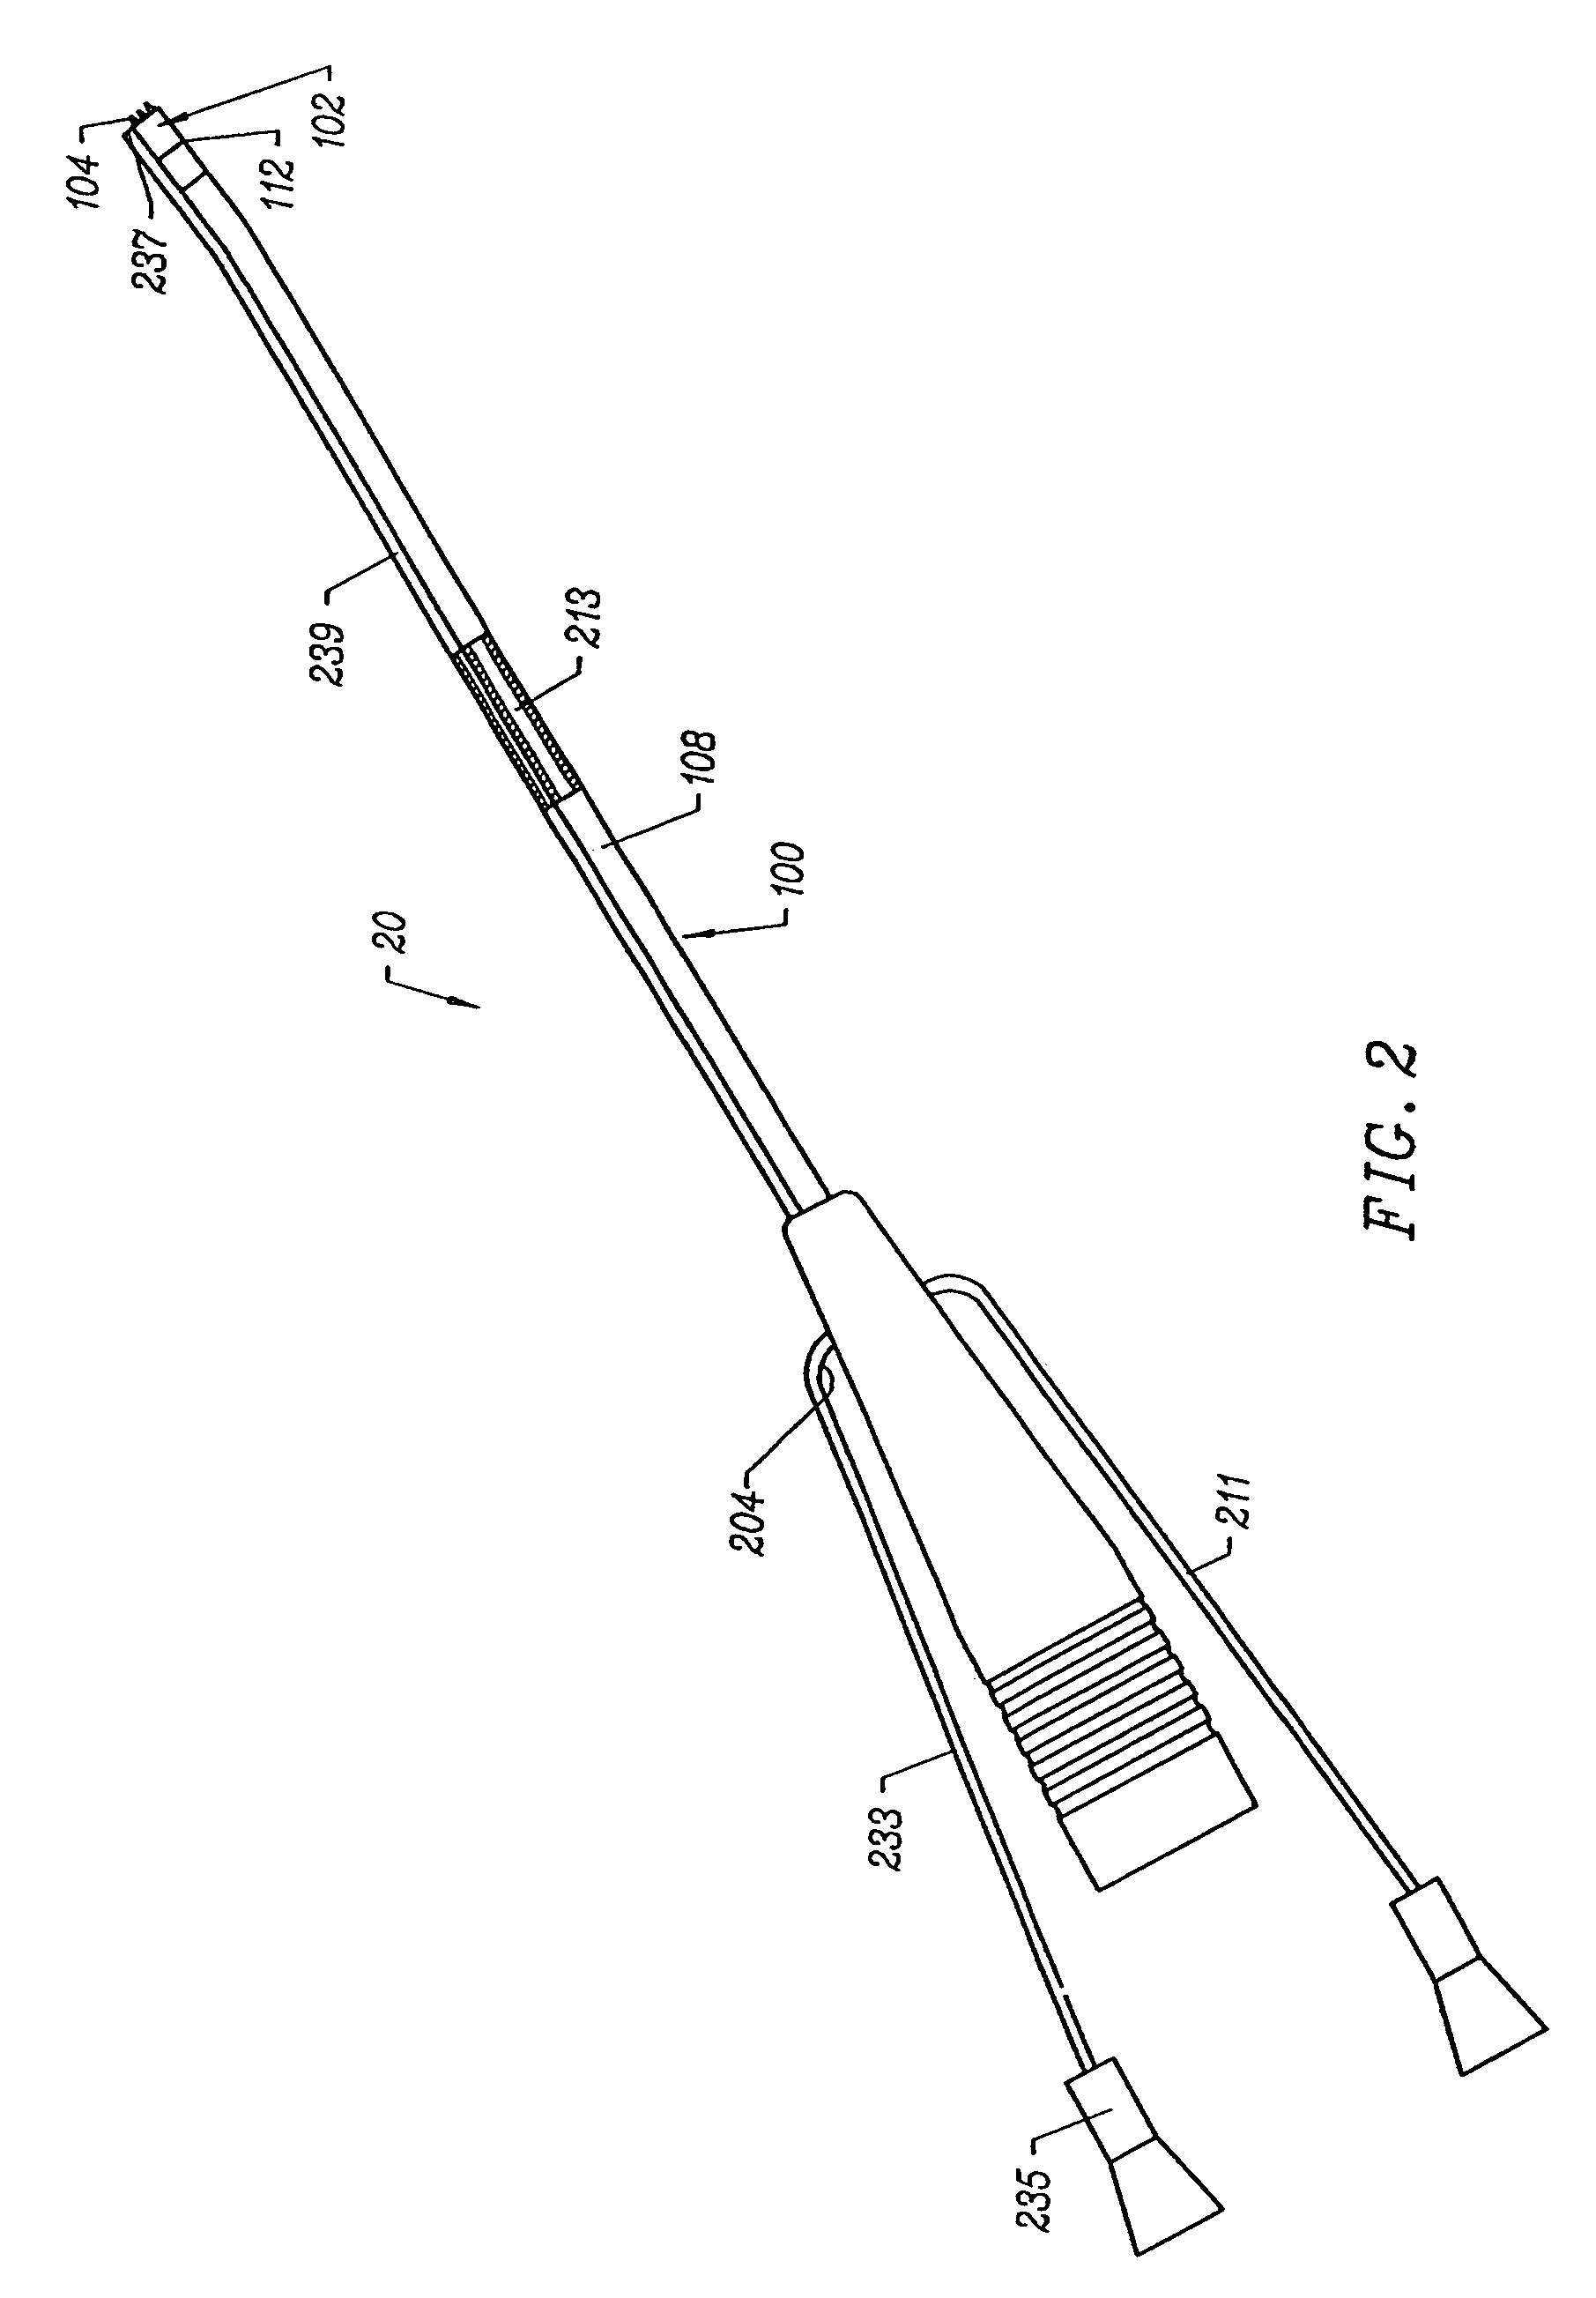 Systems and methods for electrosurgical prevention of disc herniations